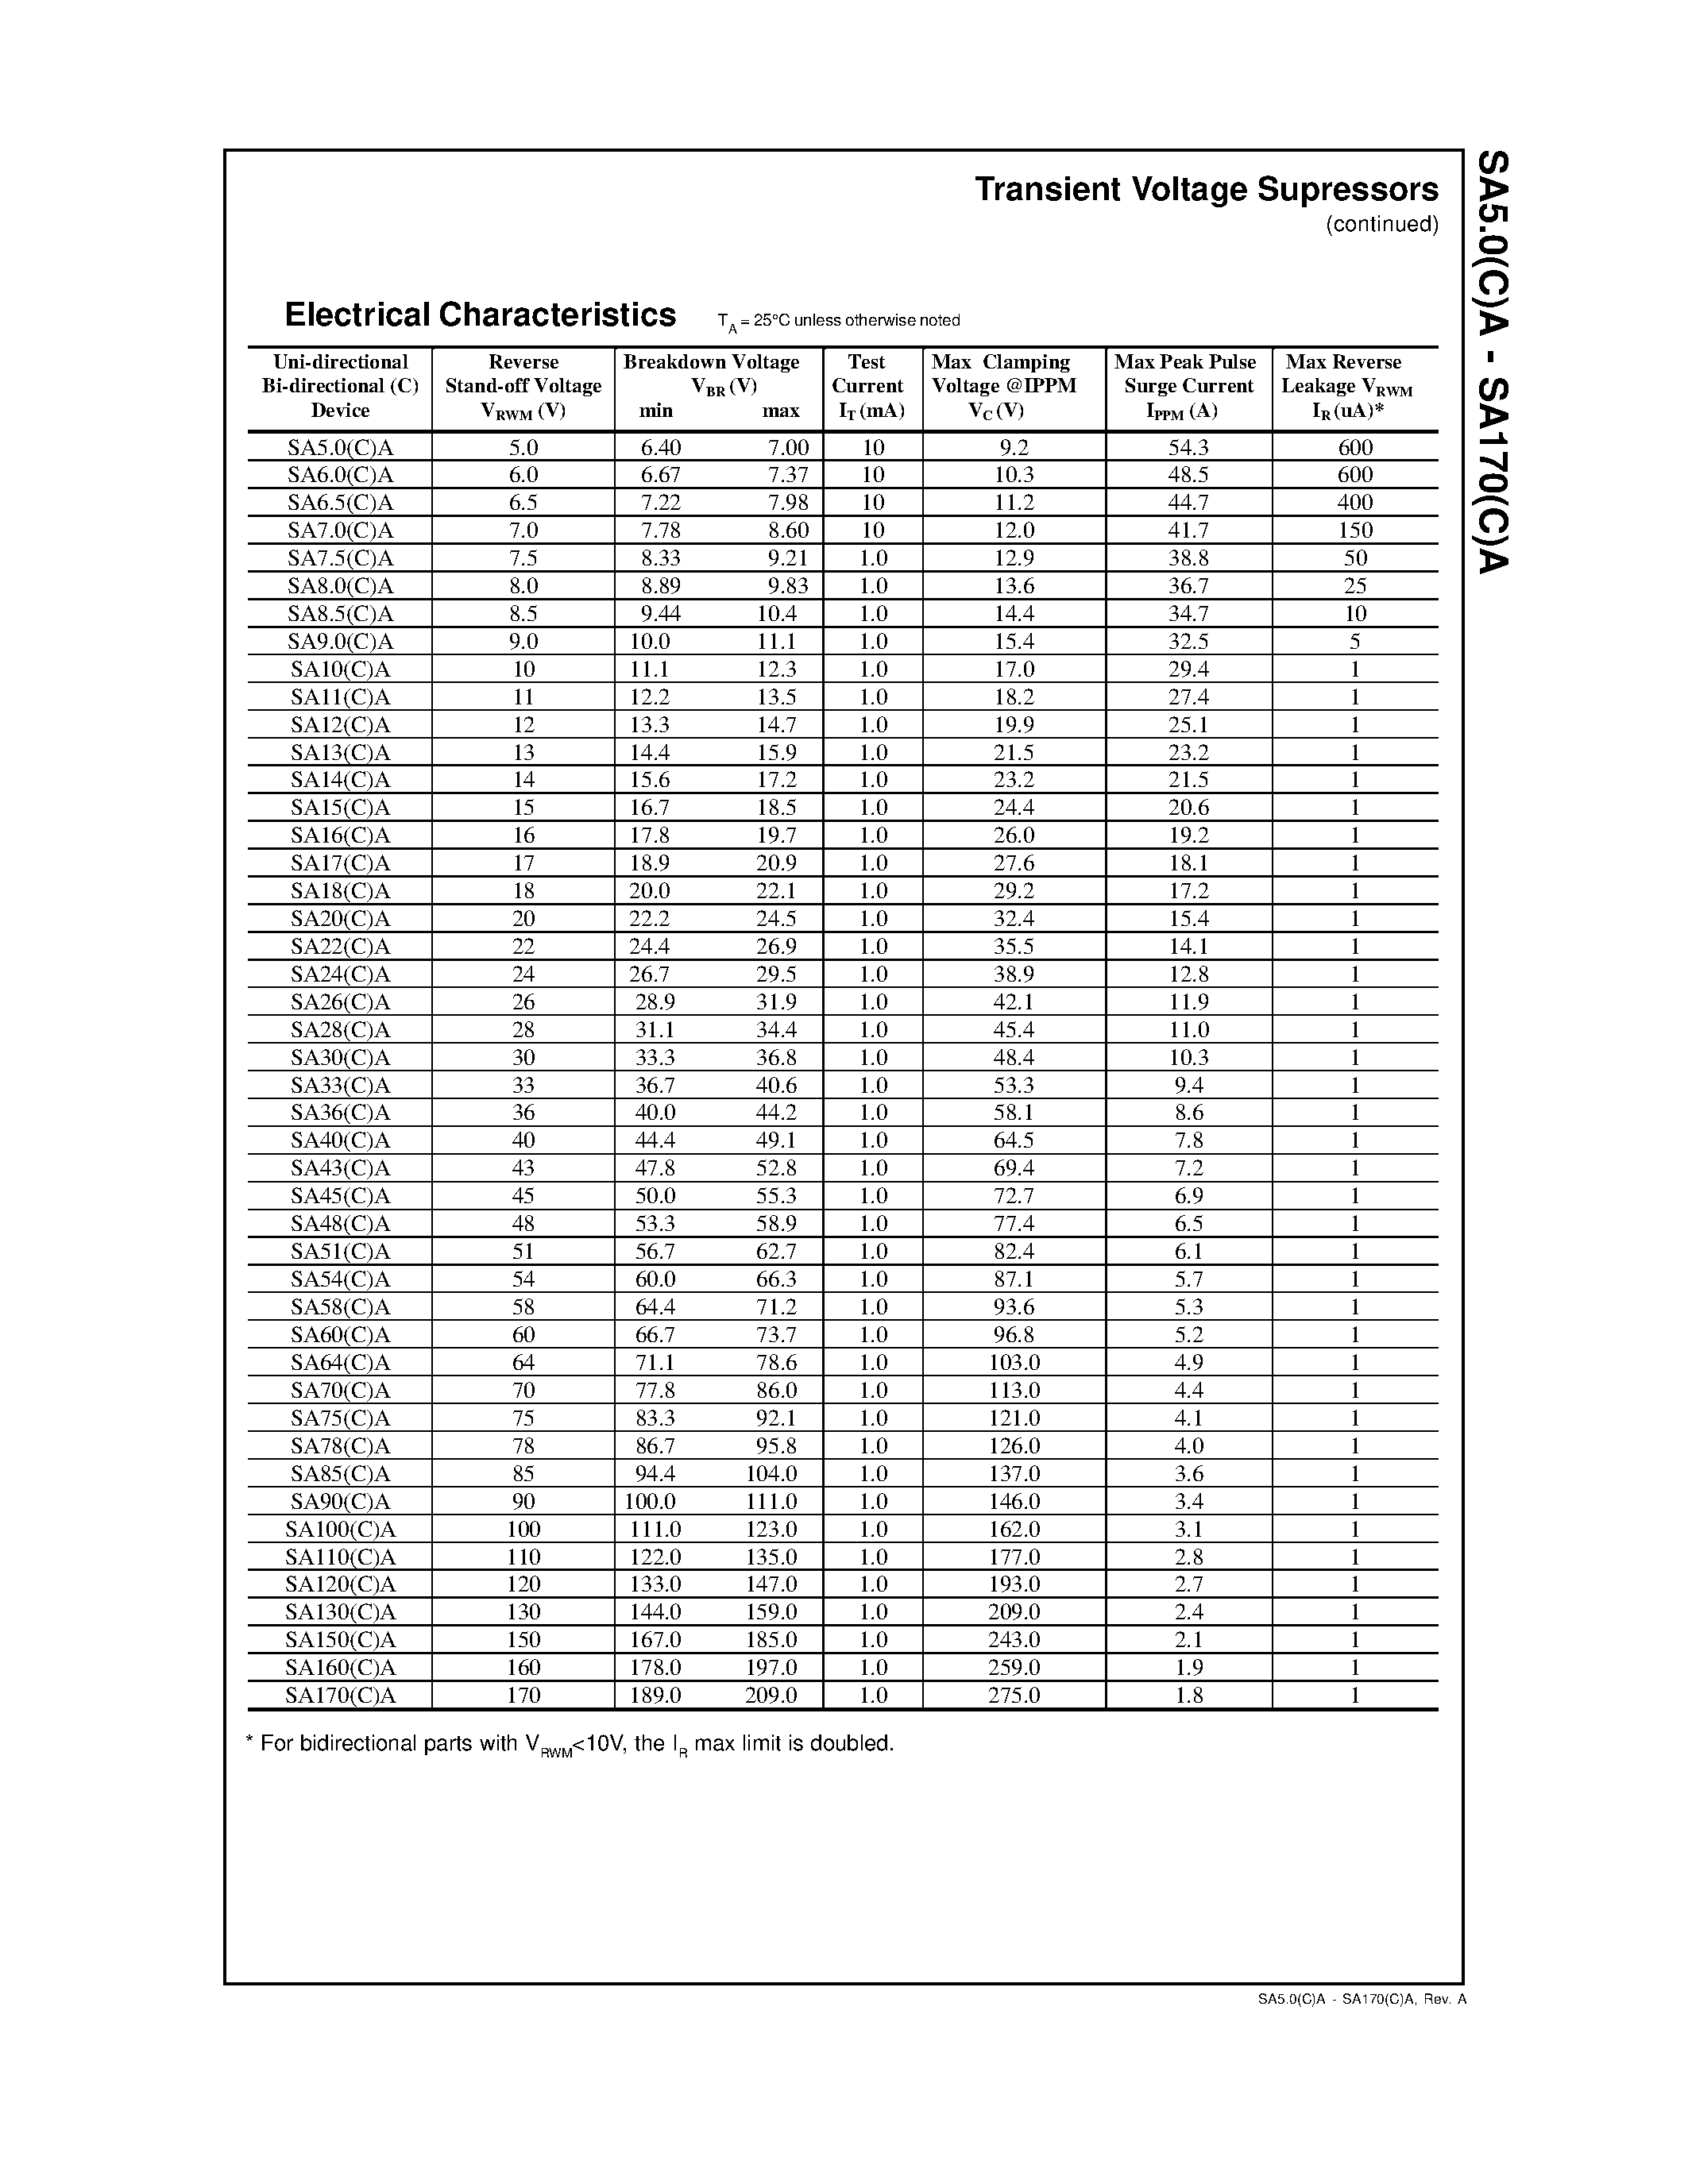 Datasheet SA10(C)A - DEVICES FOR BIPOLAR APPLICATIONS page 2